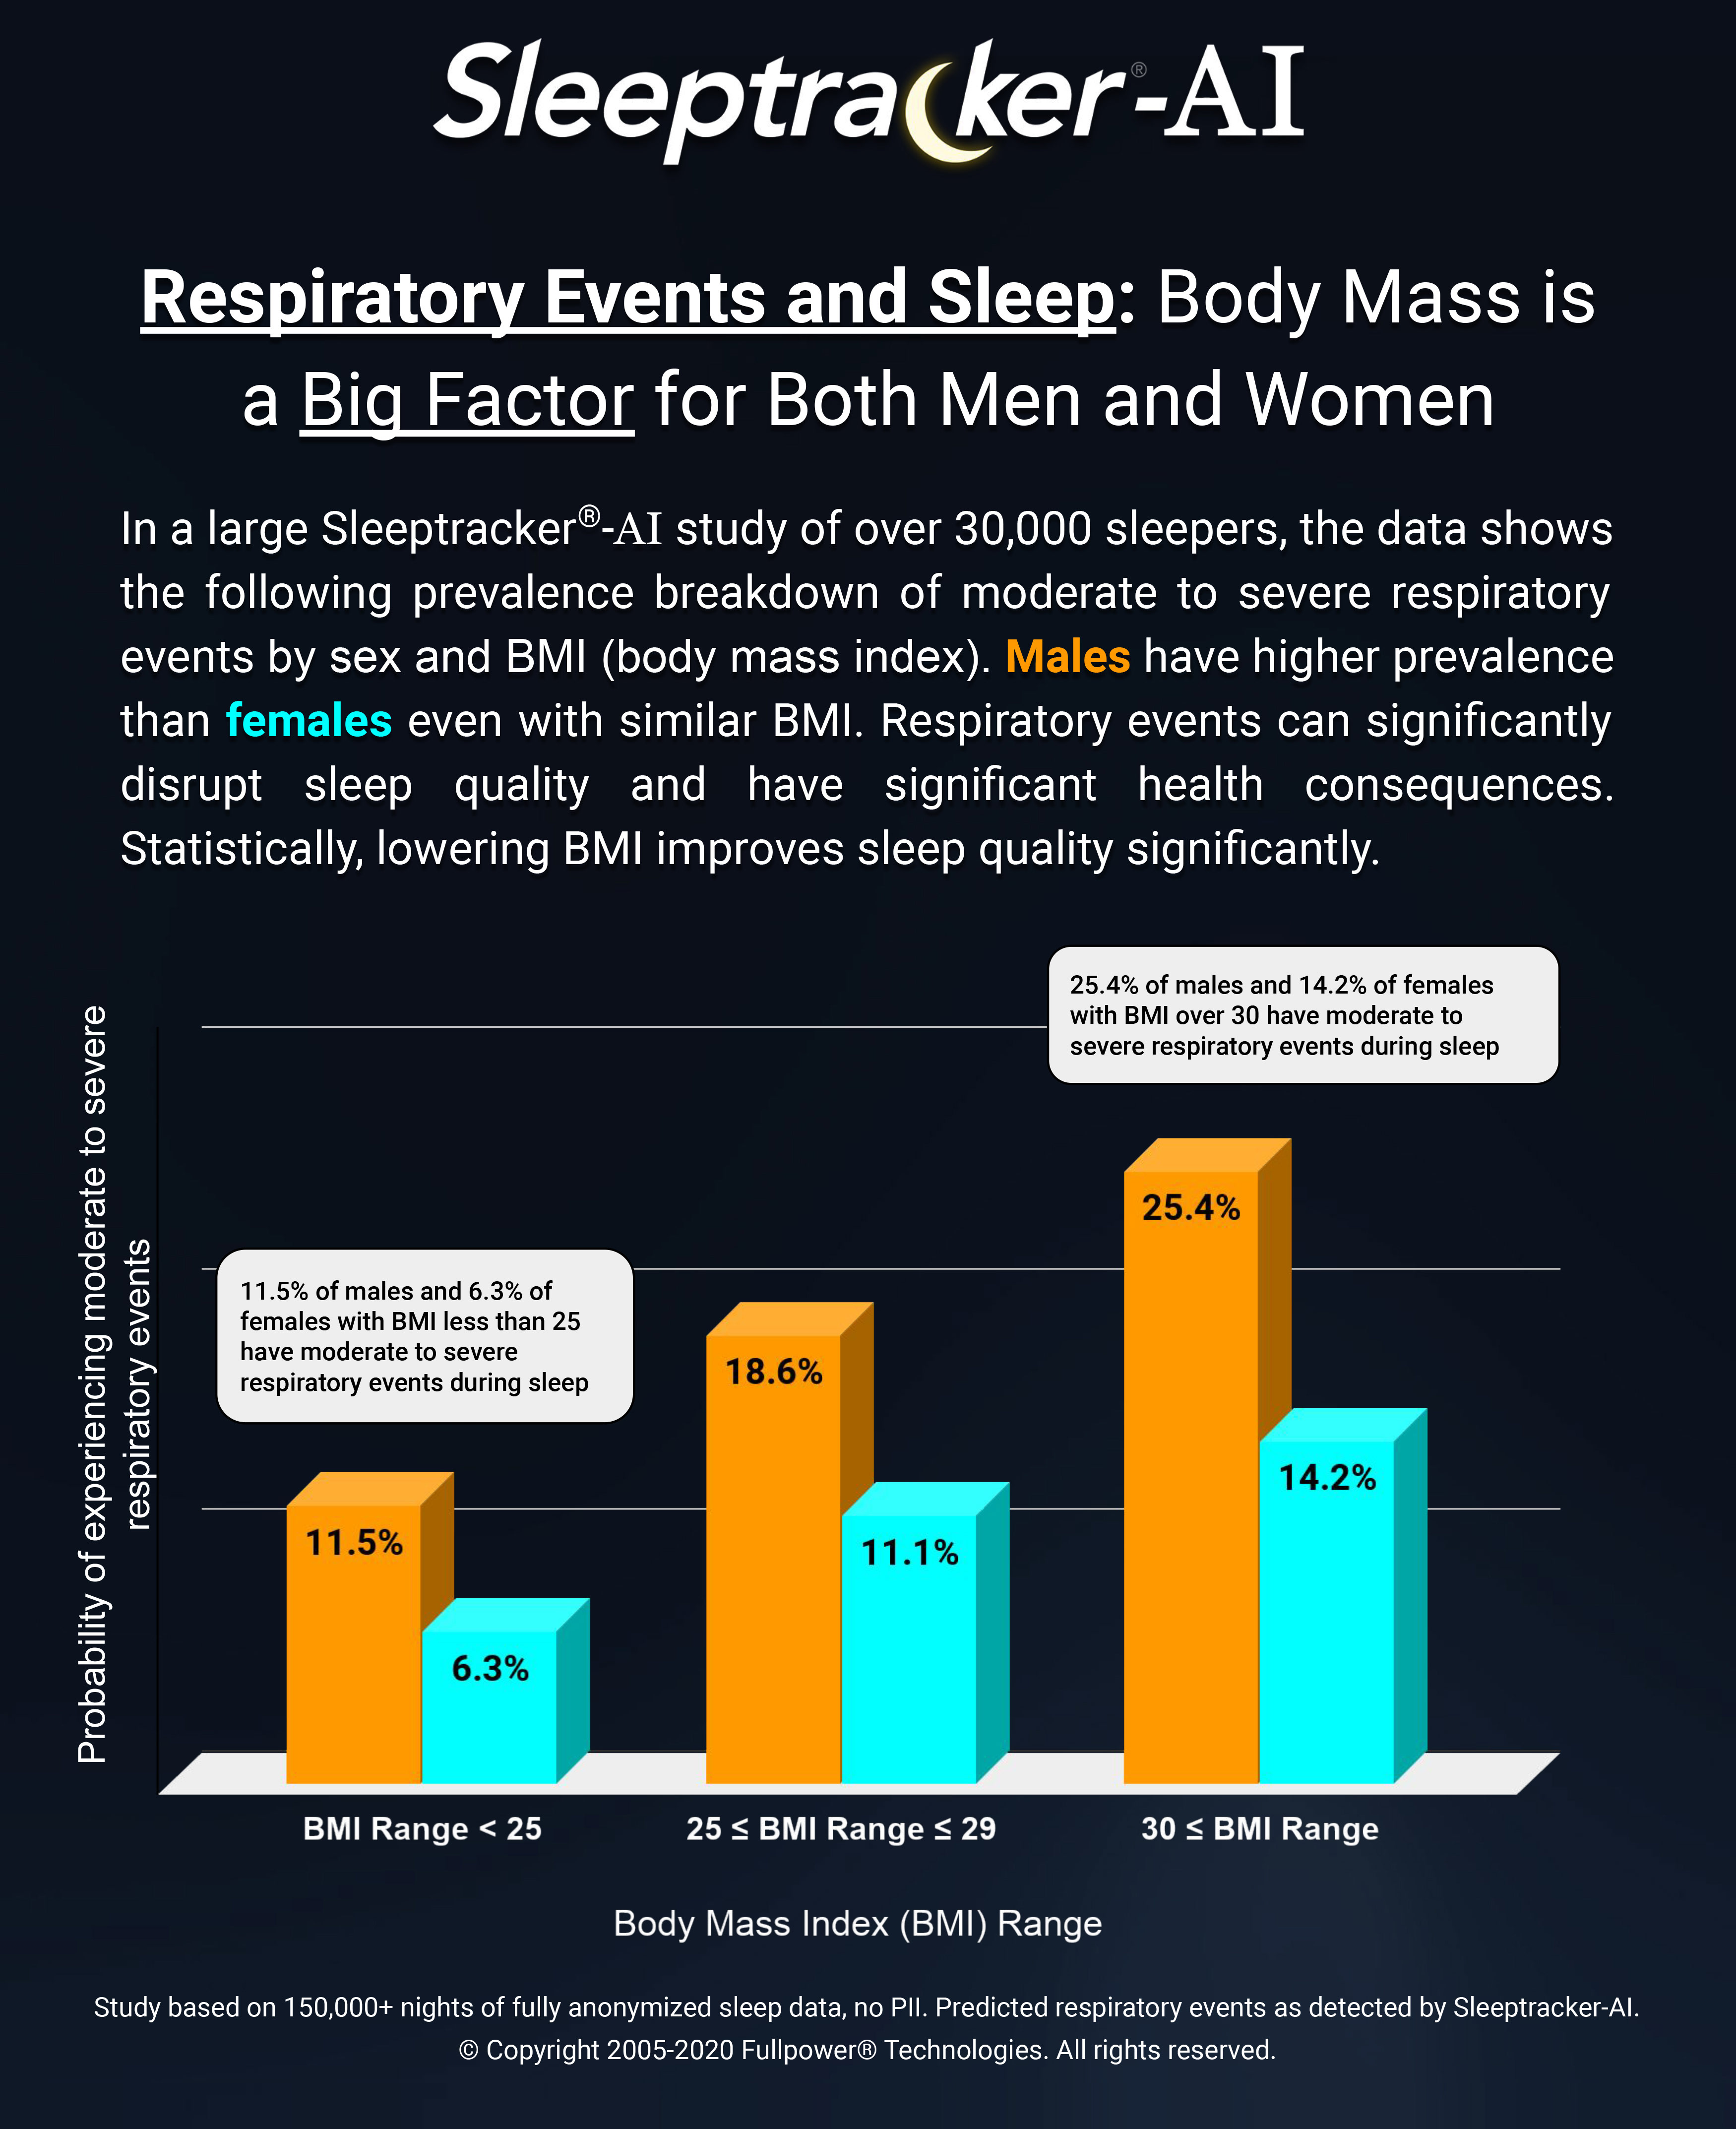 Respiratory Events and Sleep: Body Mass is a Big Factor for Both Men and Women